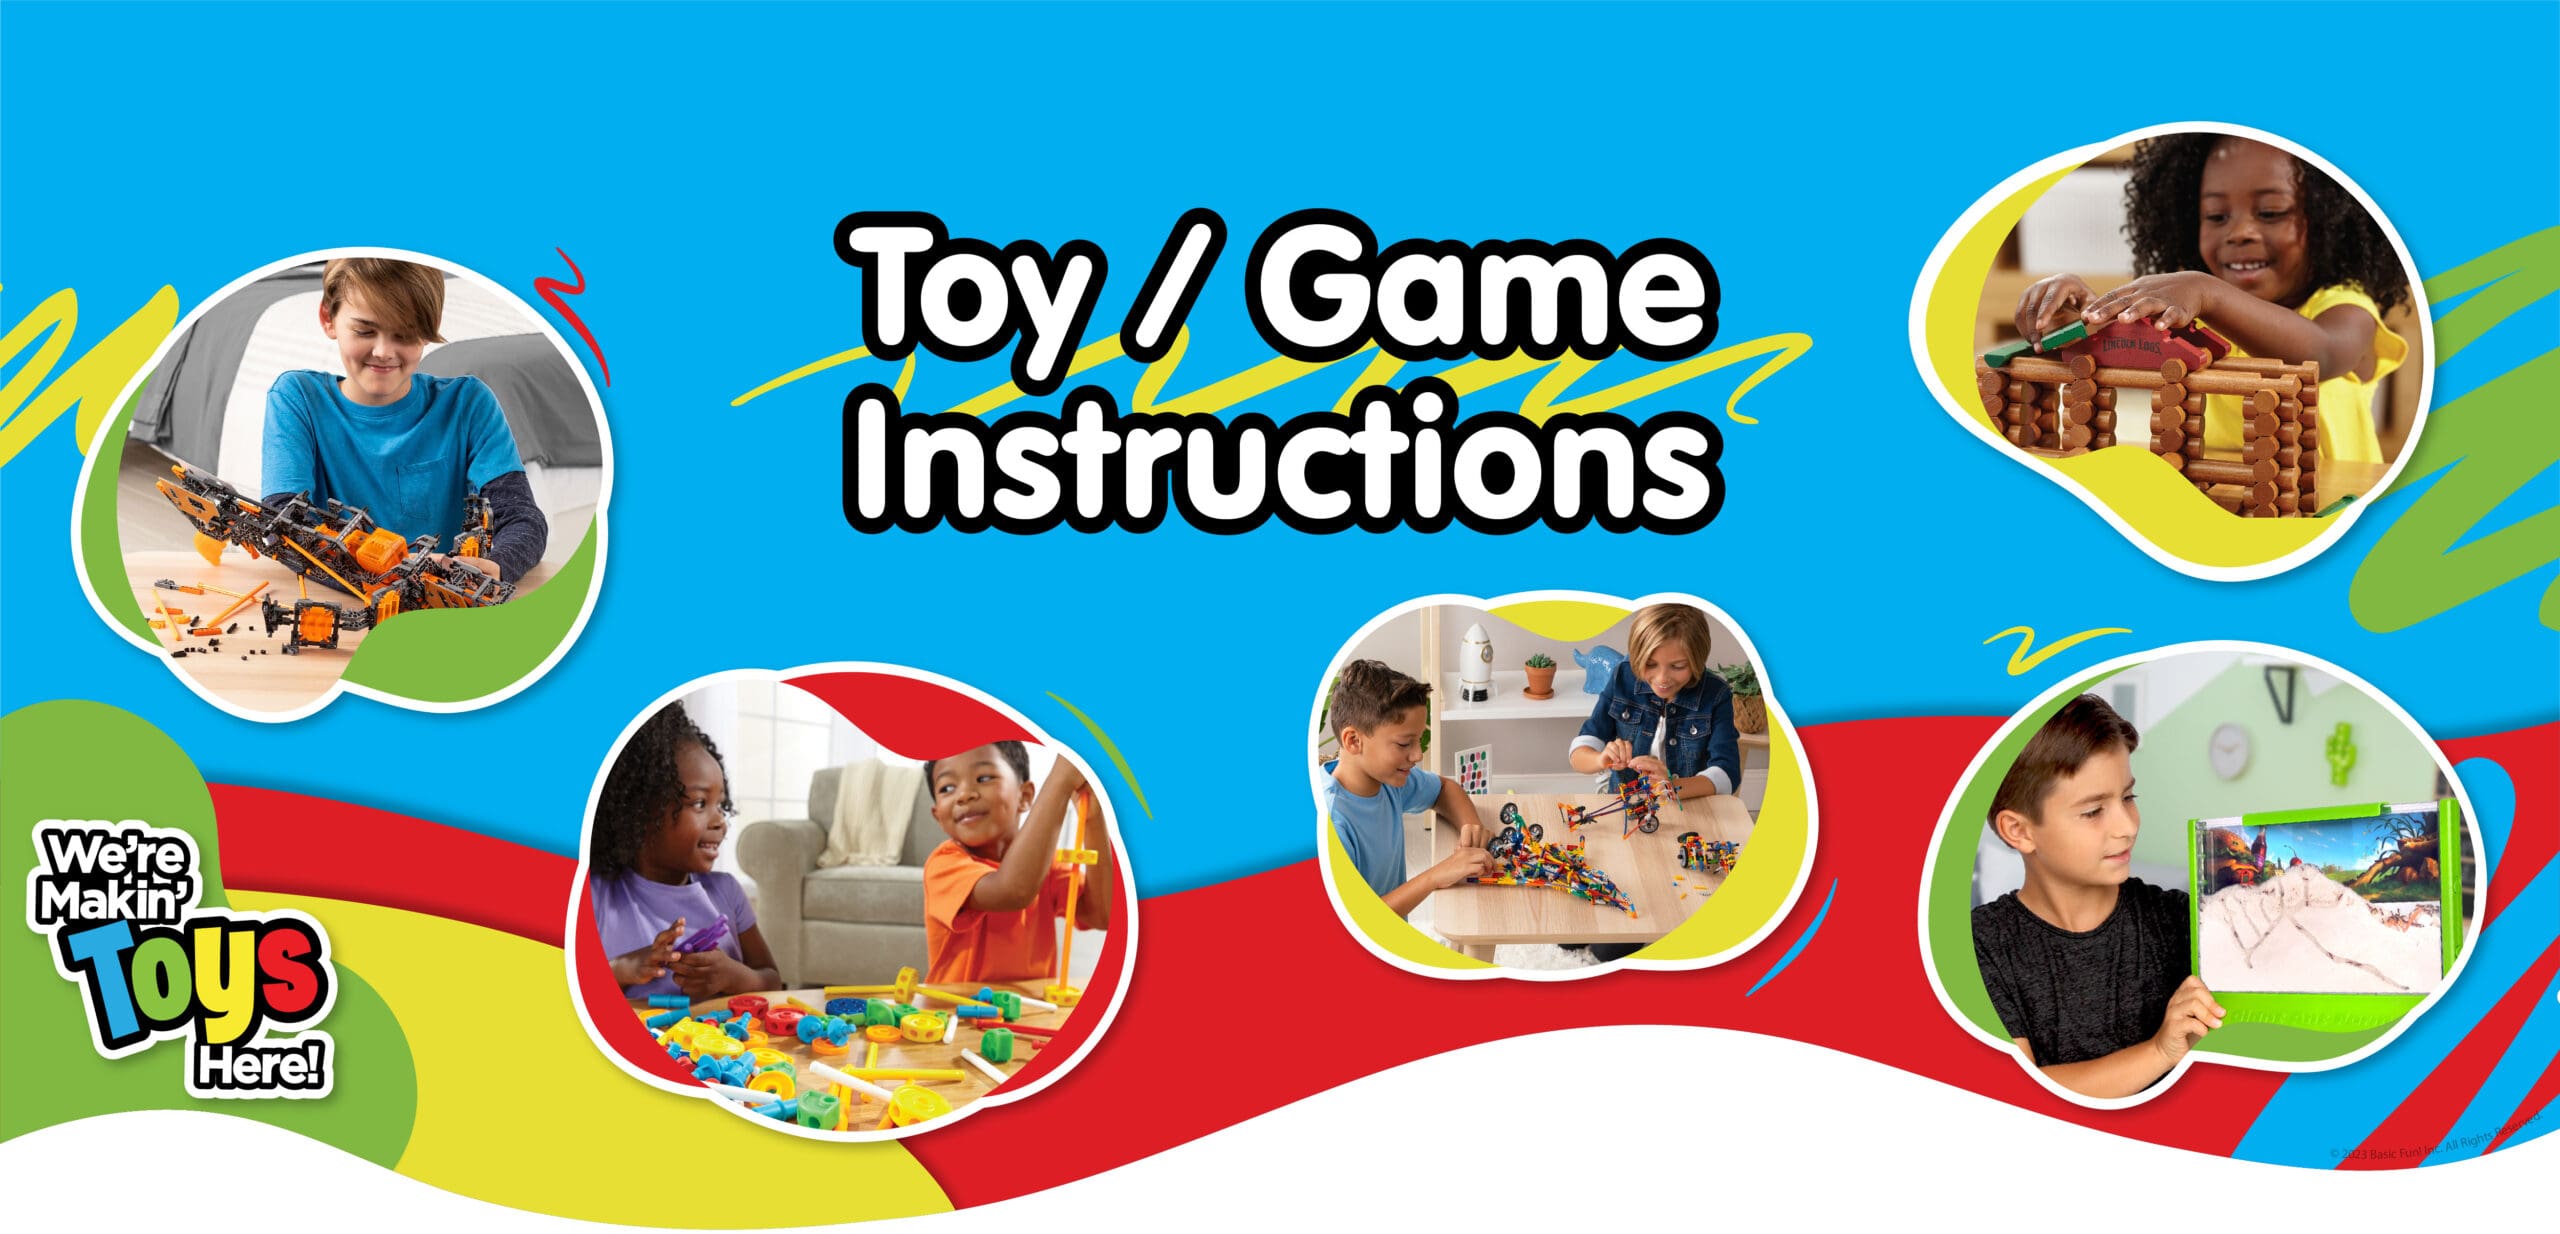 Toy - Game Instructions Banner featuring kids playing with toys